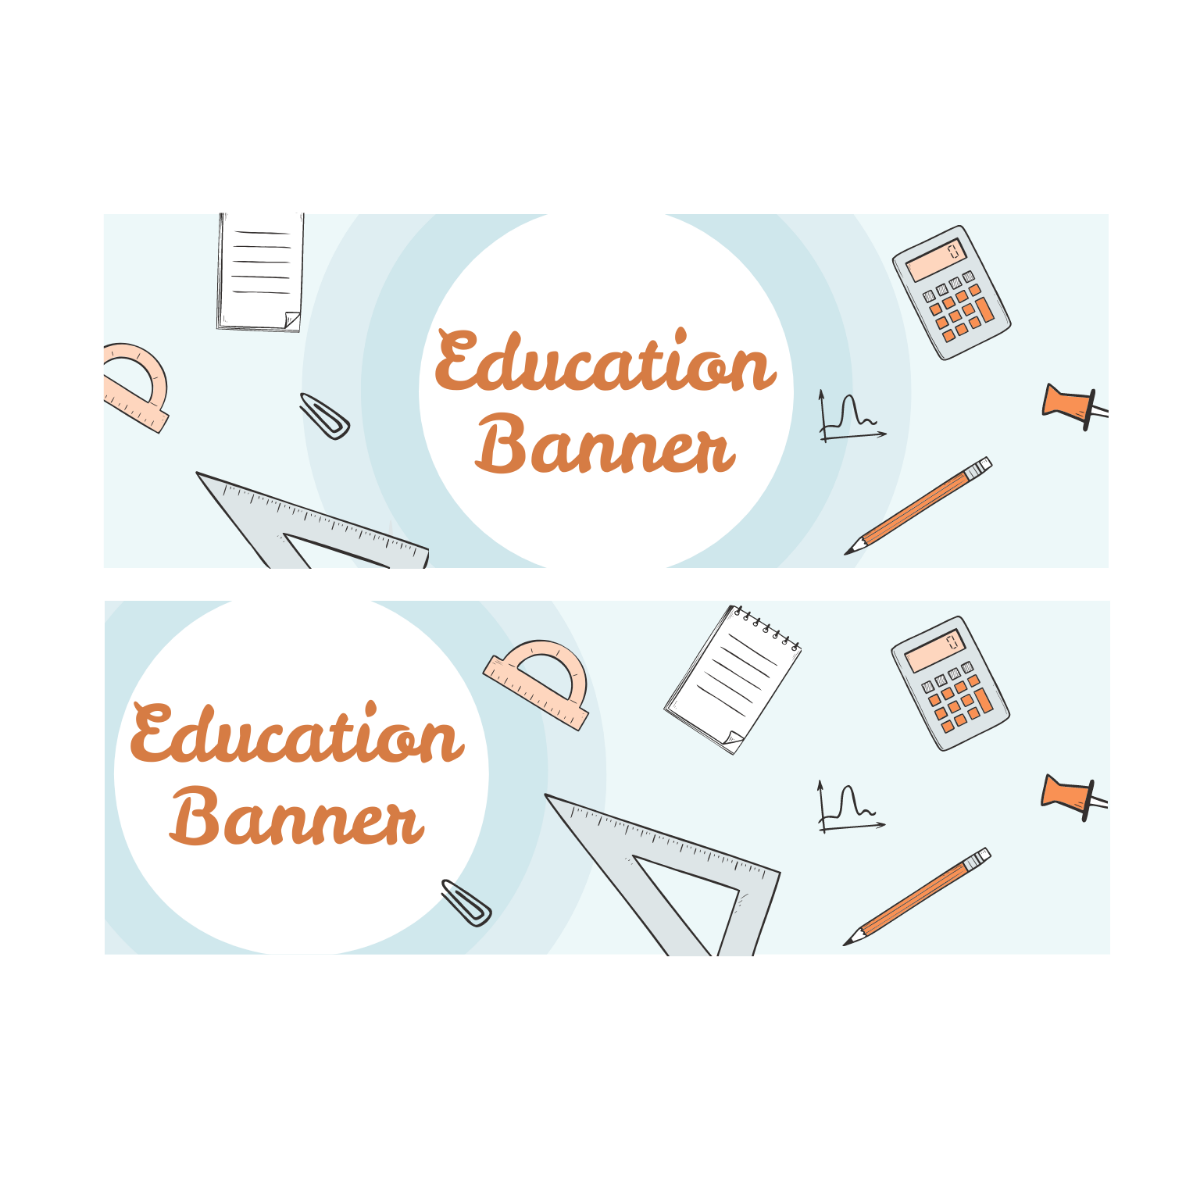 Education Banner Vector Template